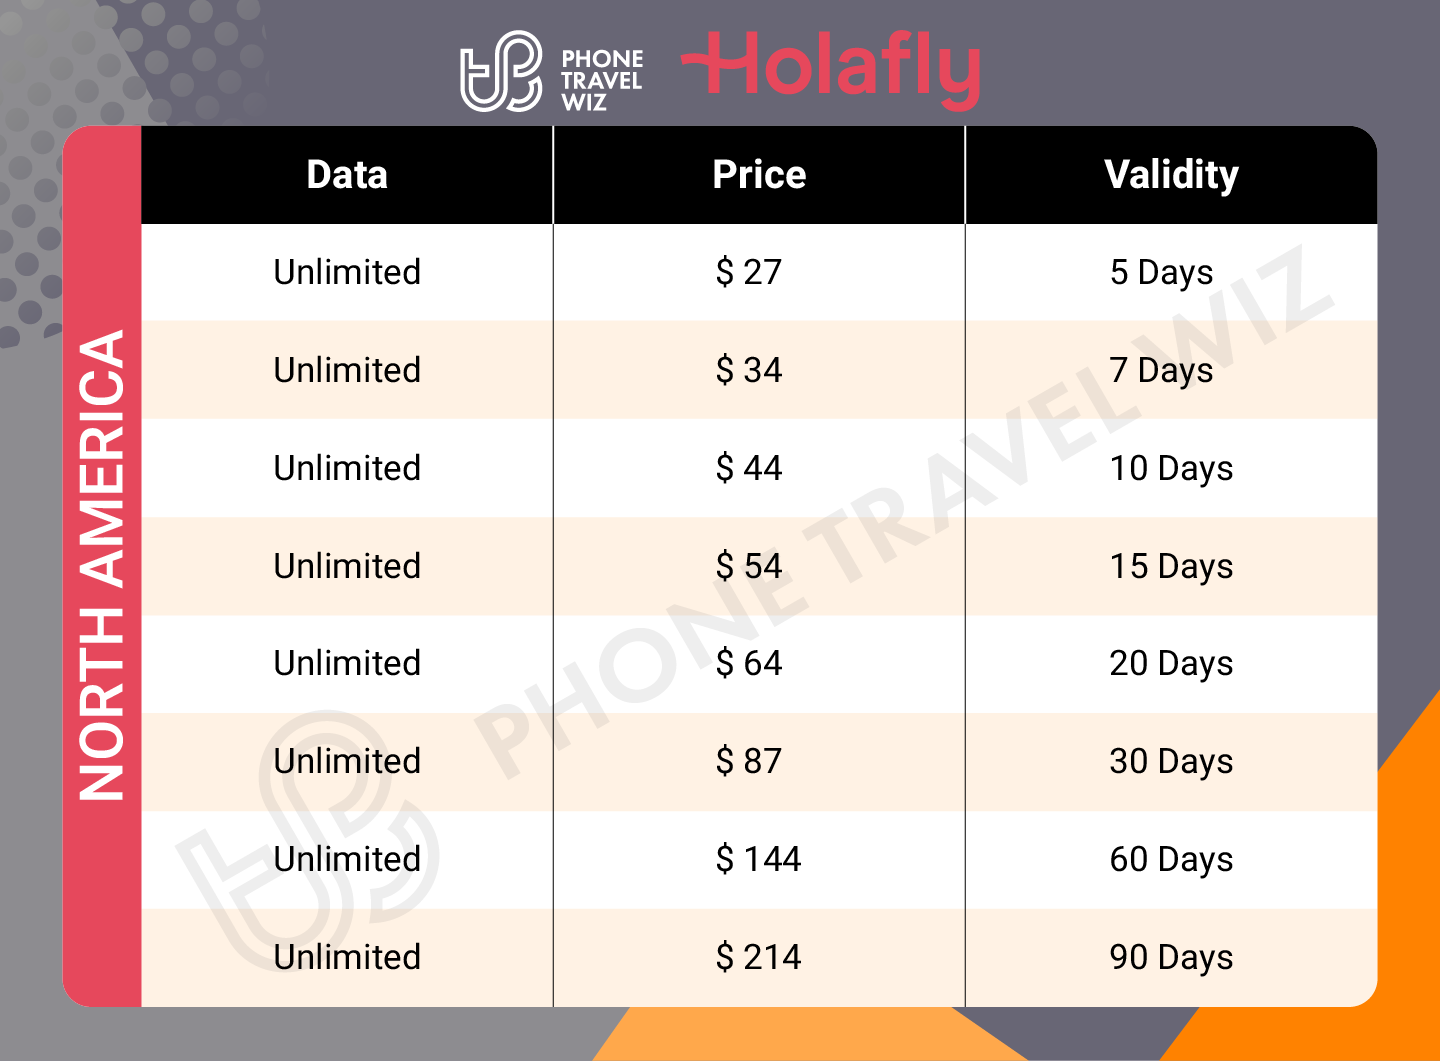 Holafly North America eSIM Price & Data Details Infographic by Phone Travel Wiz